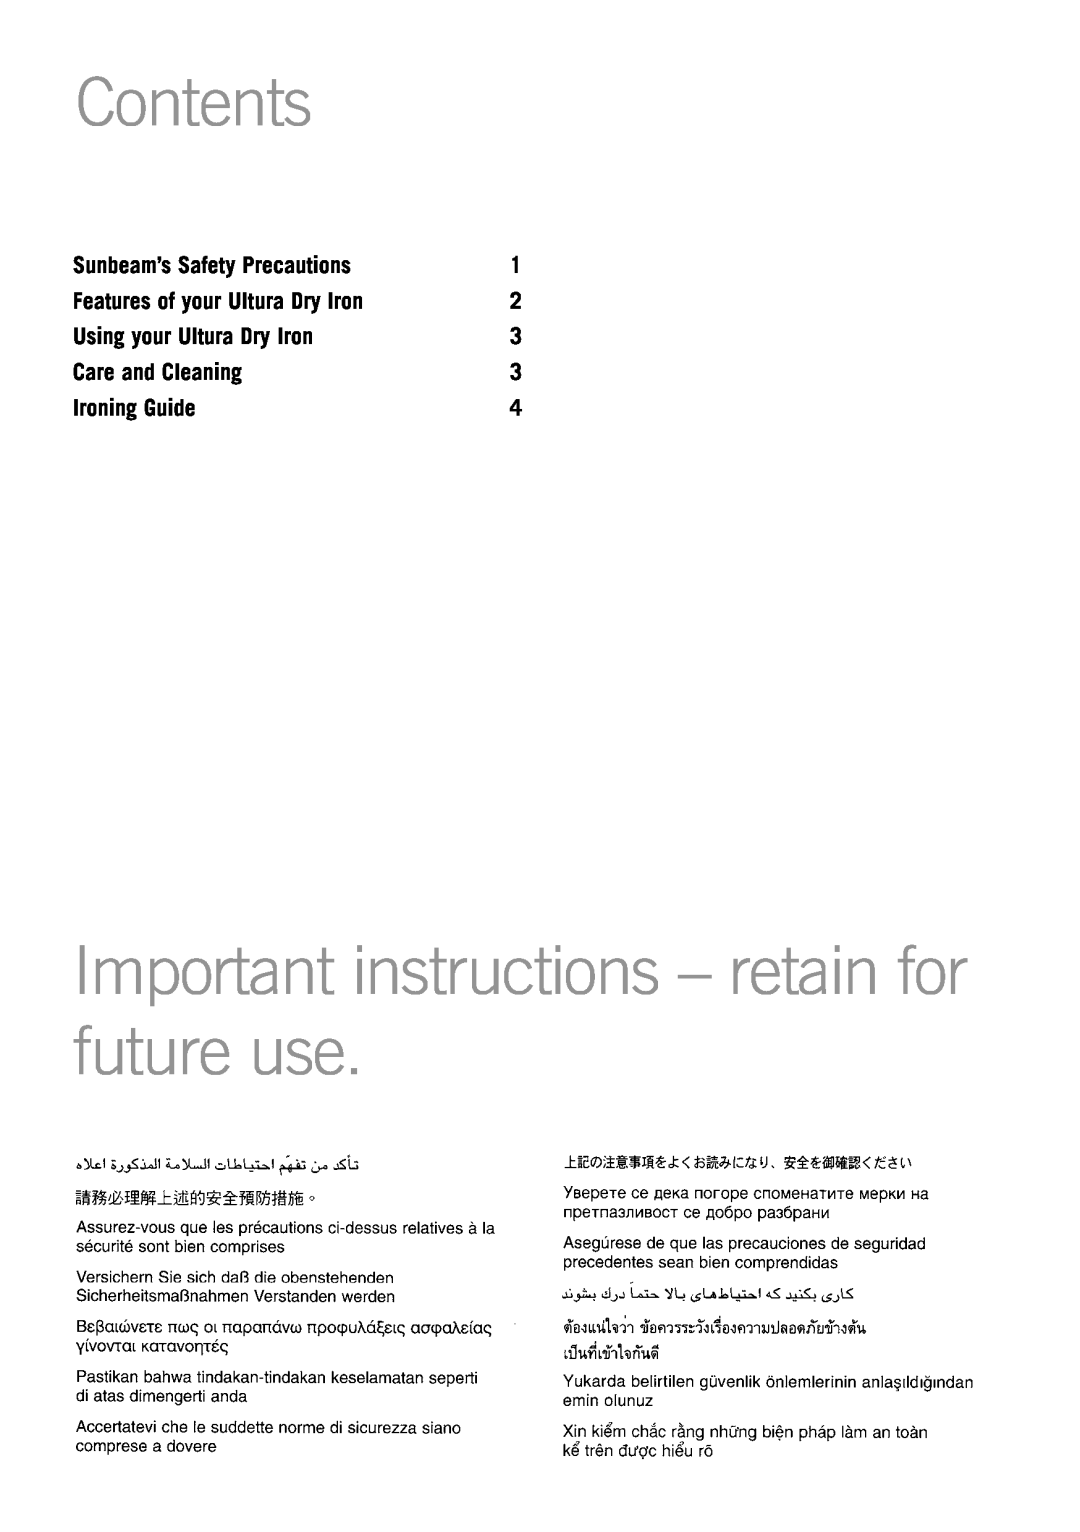 Sunbeam 2600 Important instructions - retain for future use, Sunbeam’s Safety Precautions, Using your Ultura Dry Iron 